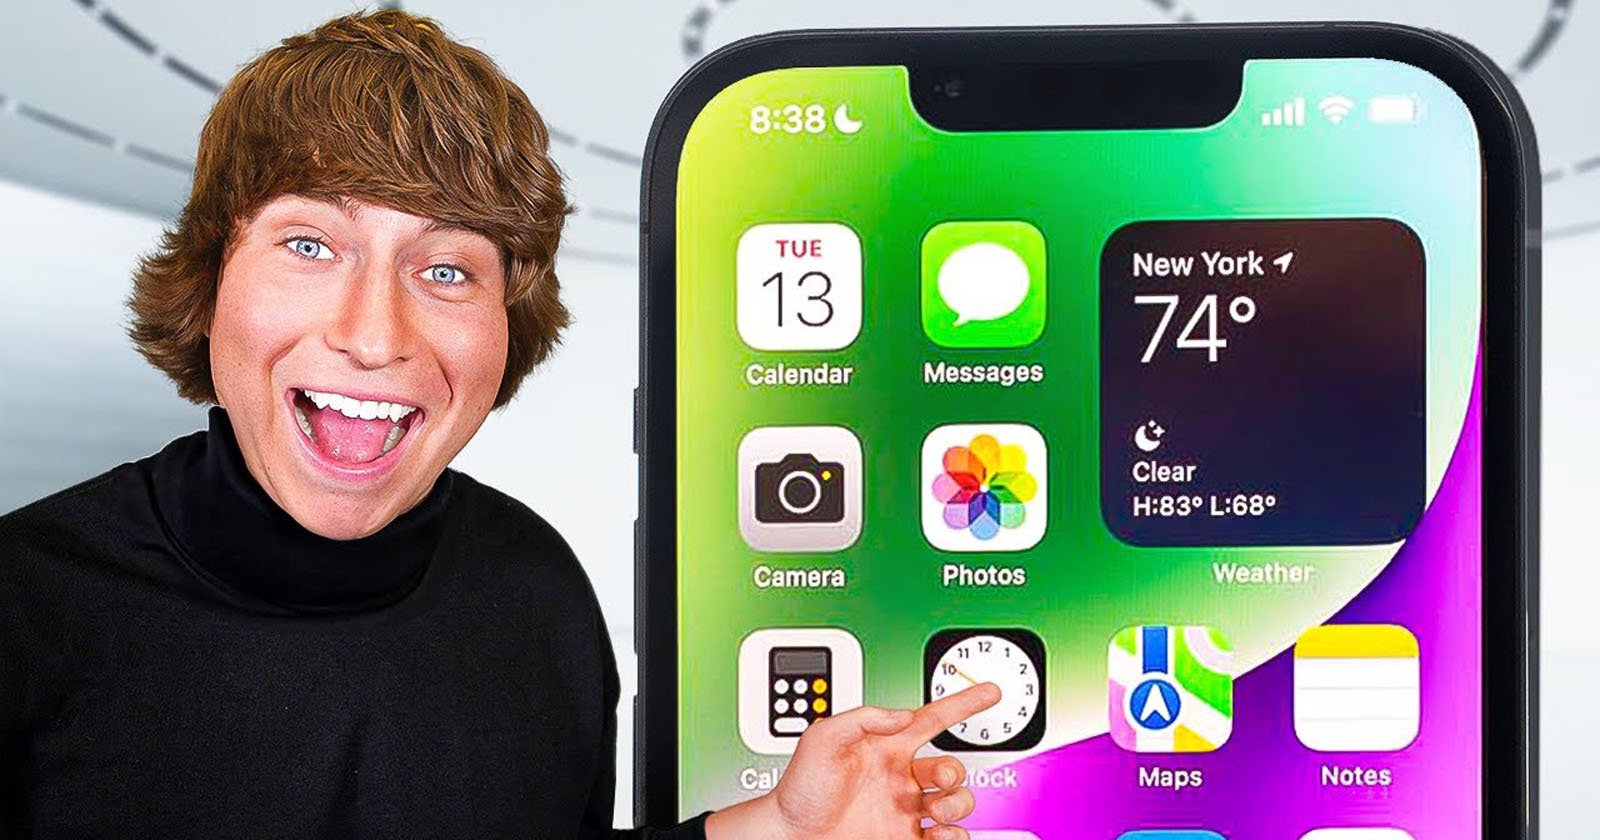 YouTuber Builds a Massive 7-Foot Tall Fully Functional iPhone